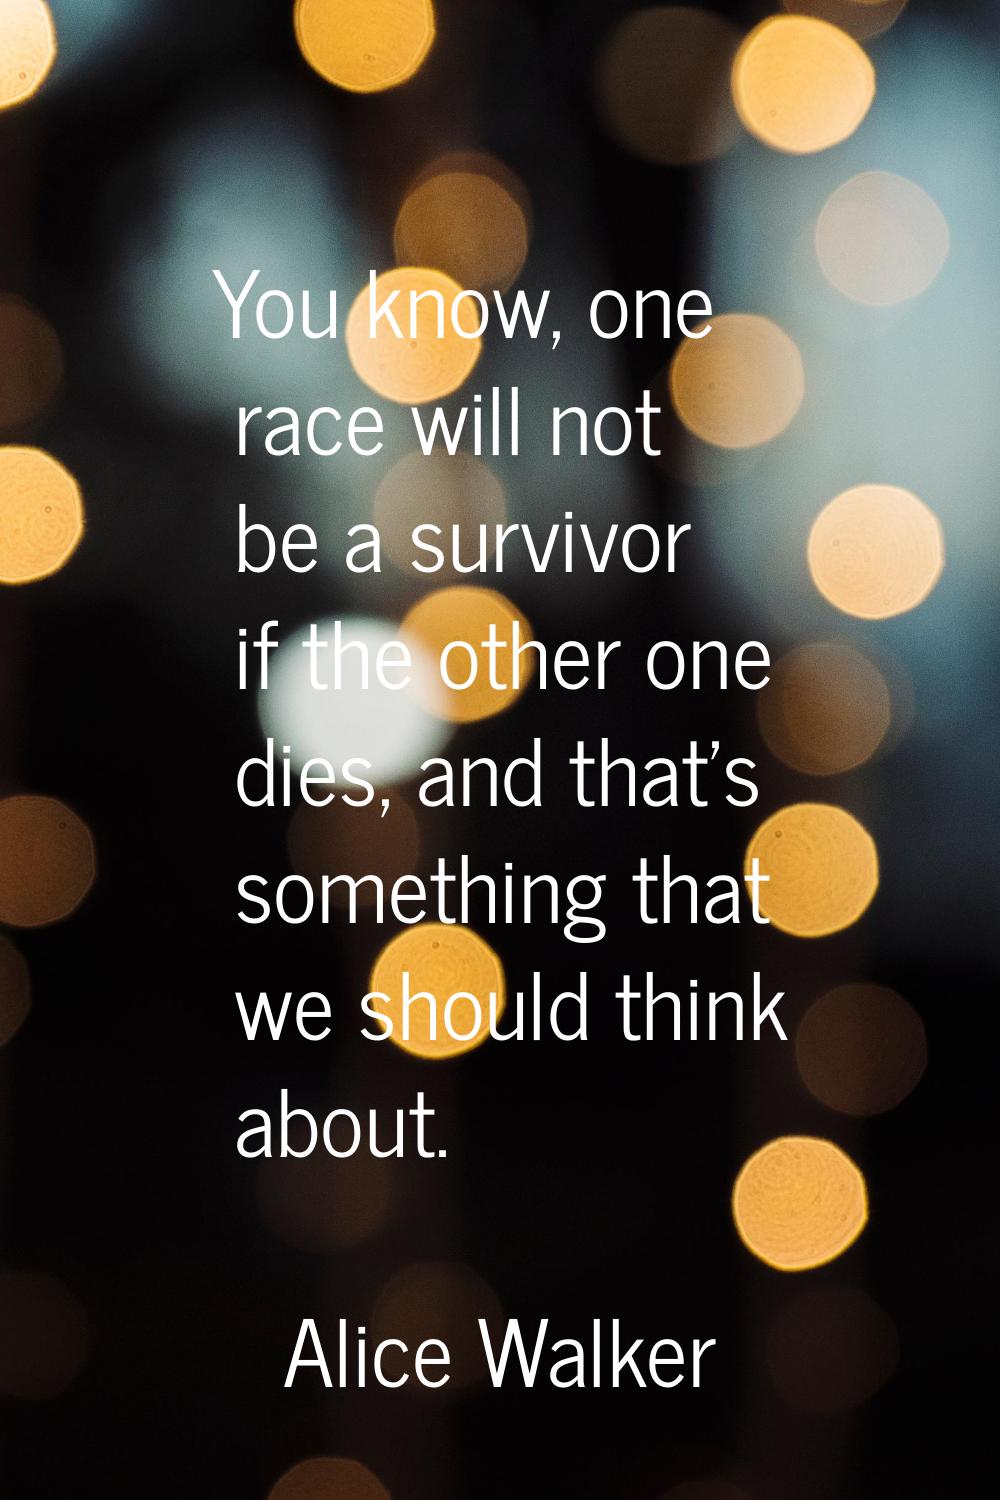 You know, one race will not be a survivor if the other one dies, and that's something that we shoul